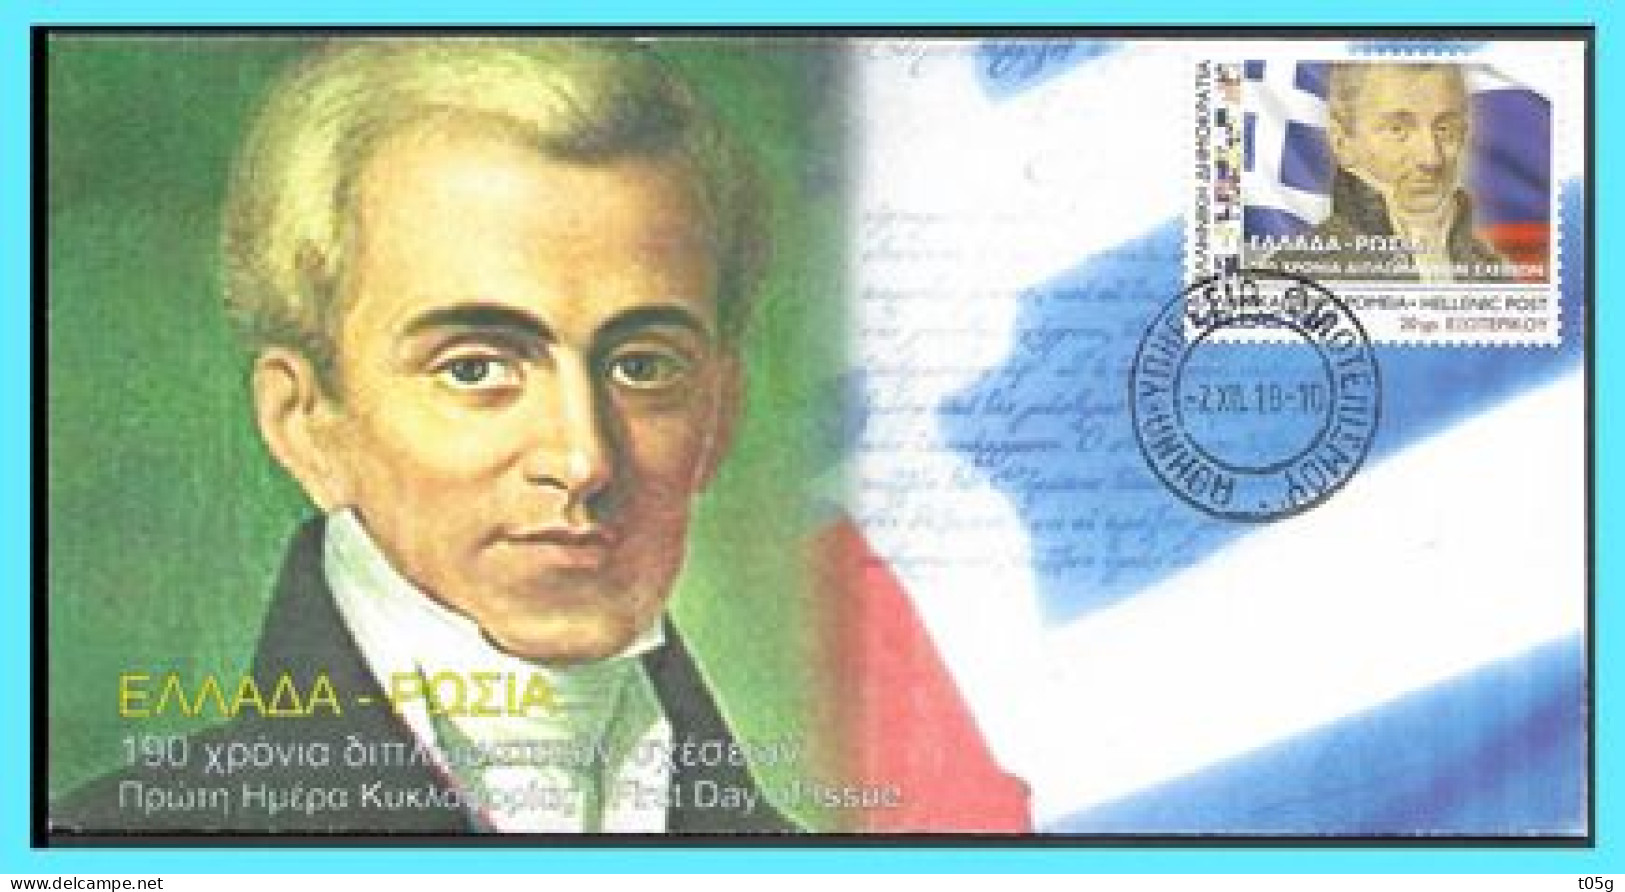 GREECE- GRECE- HELLAS 2018: ( FDC 02 XII 18 )  Fron Adhesive Booklet.  190years Of Diplomatic Relations Greece-Russia - FDC